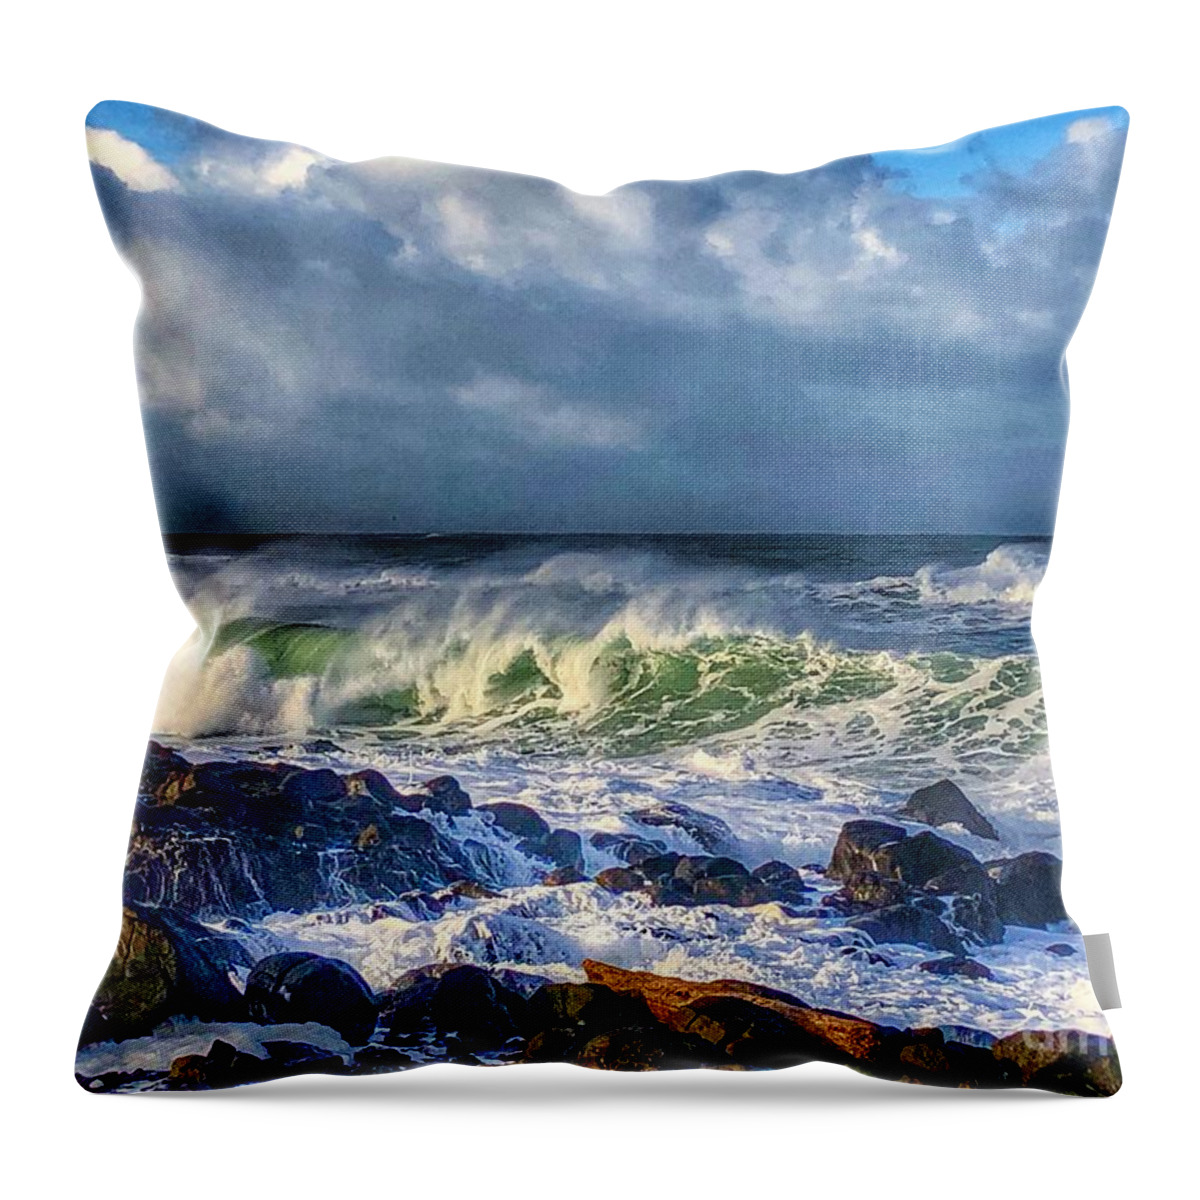 Winter Throw Pillow featuring the photograph Sunbreak Waves by Jeanette French